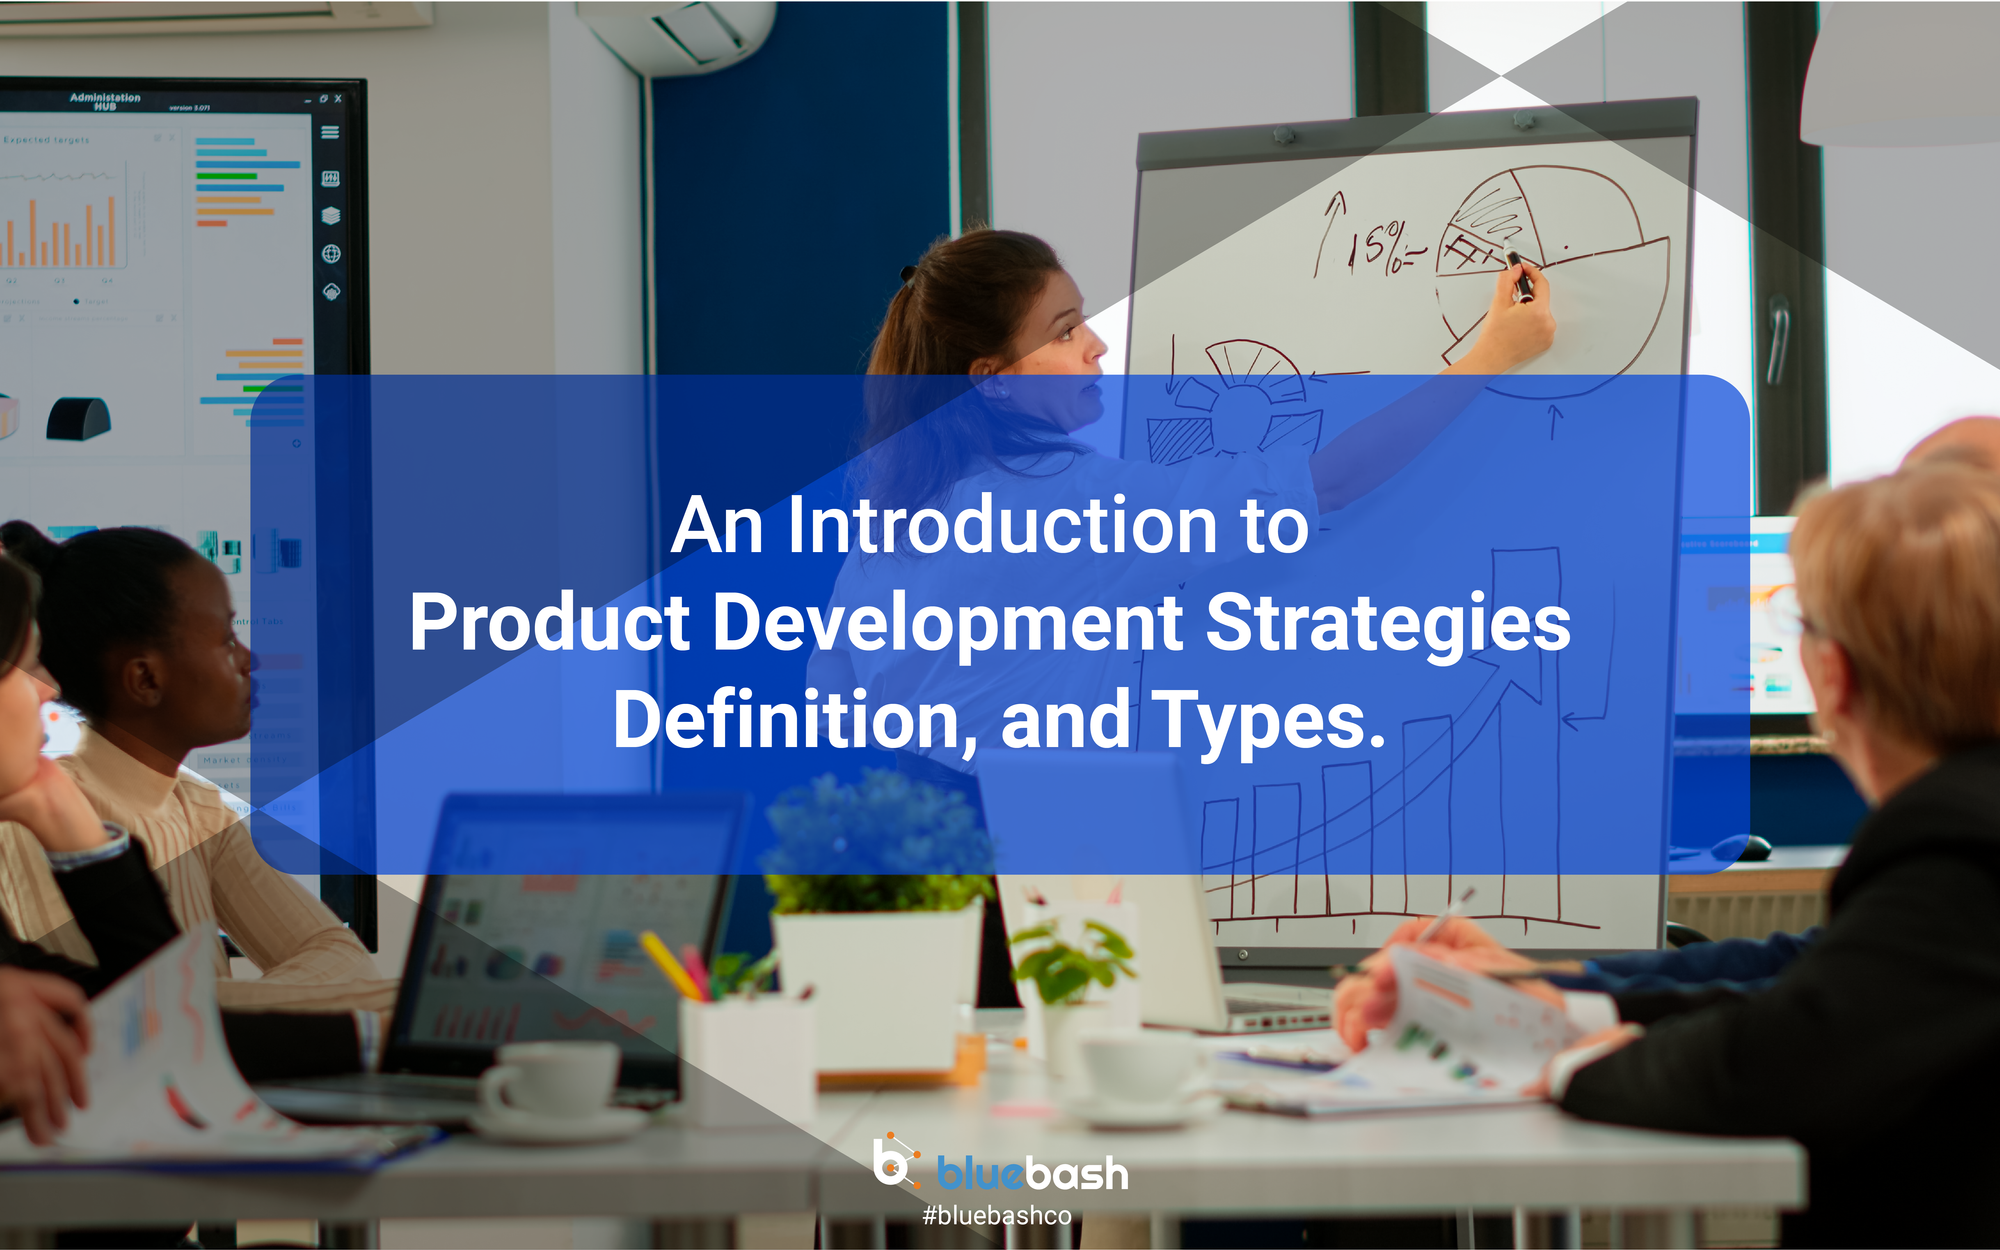 An Introduction to Product Development Strategies Definition, and Types.